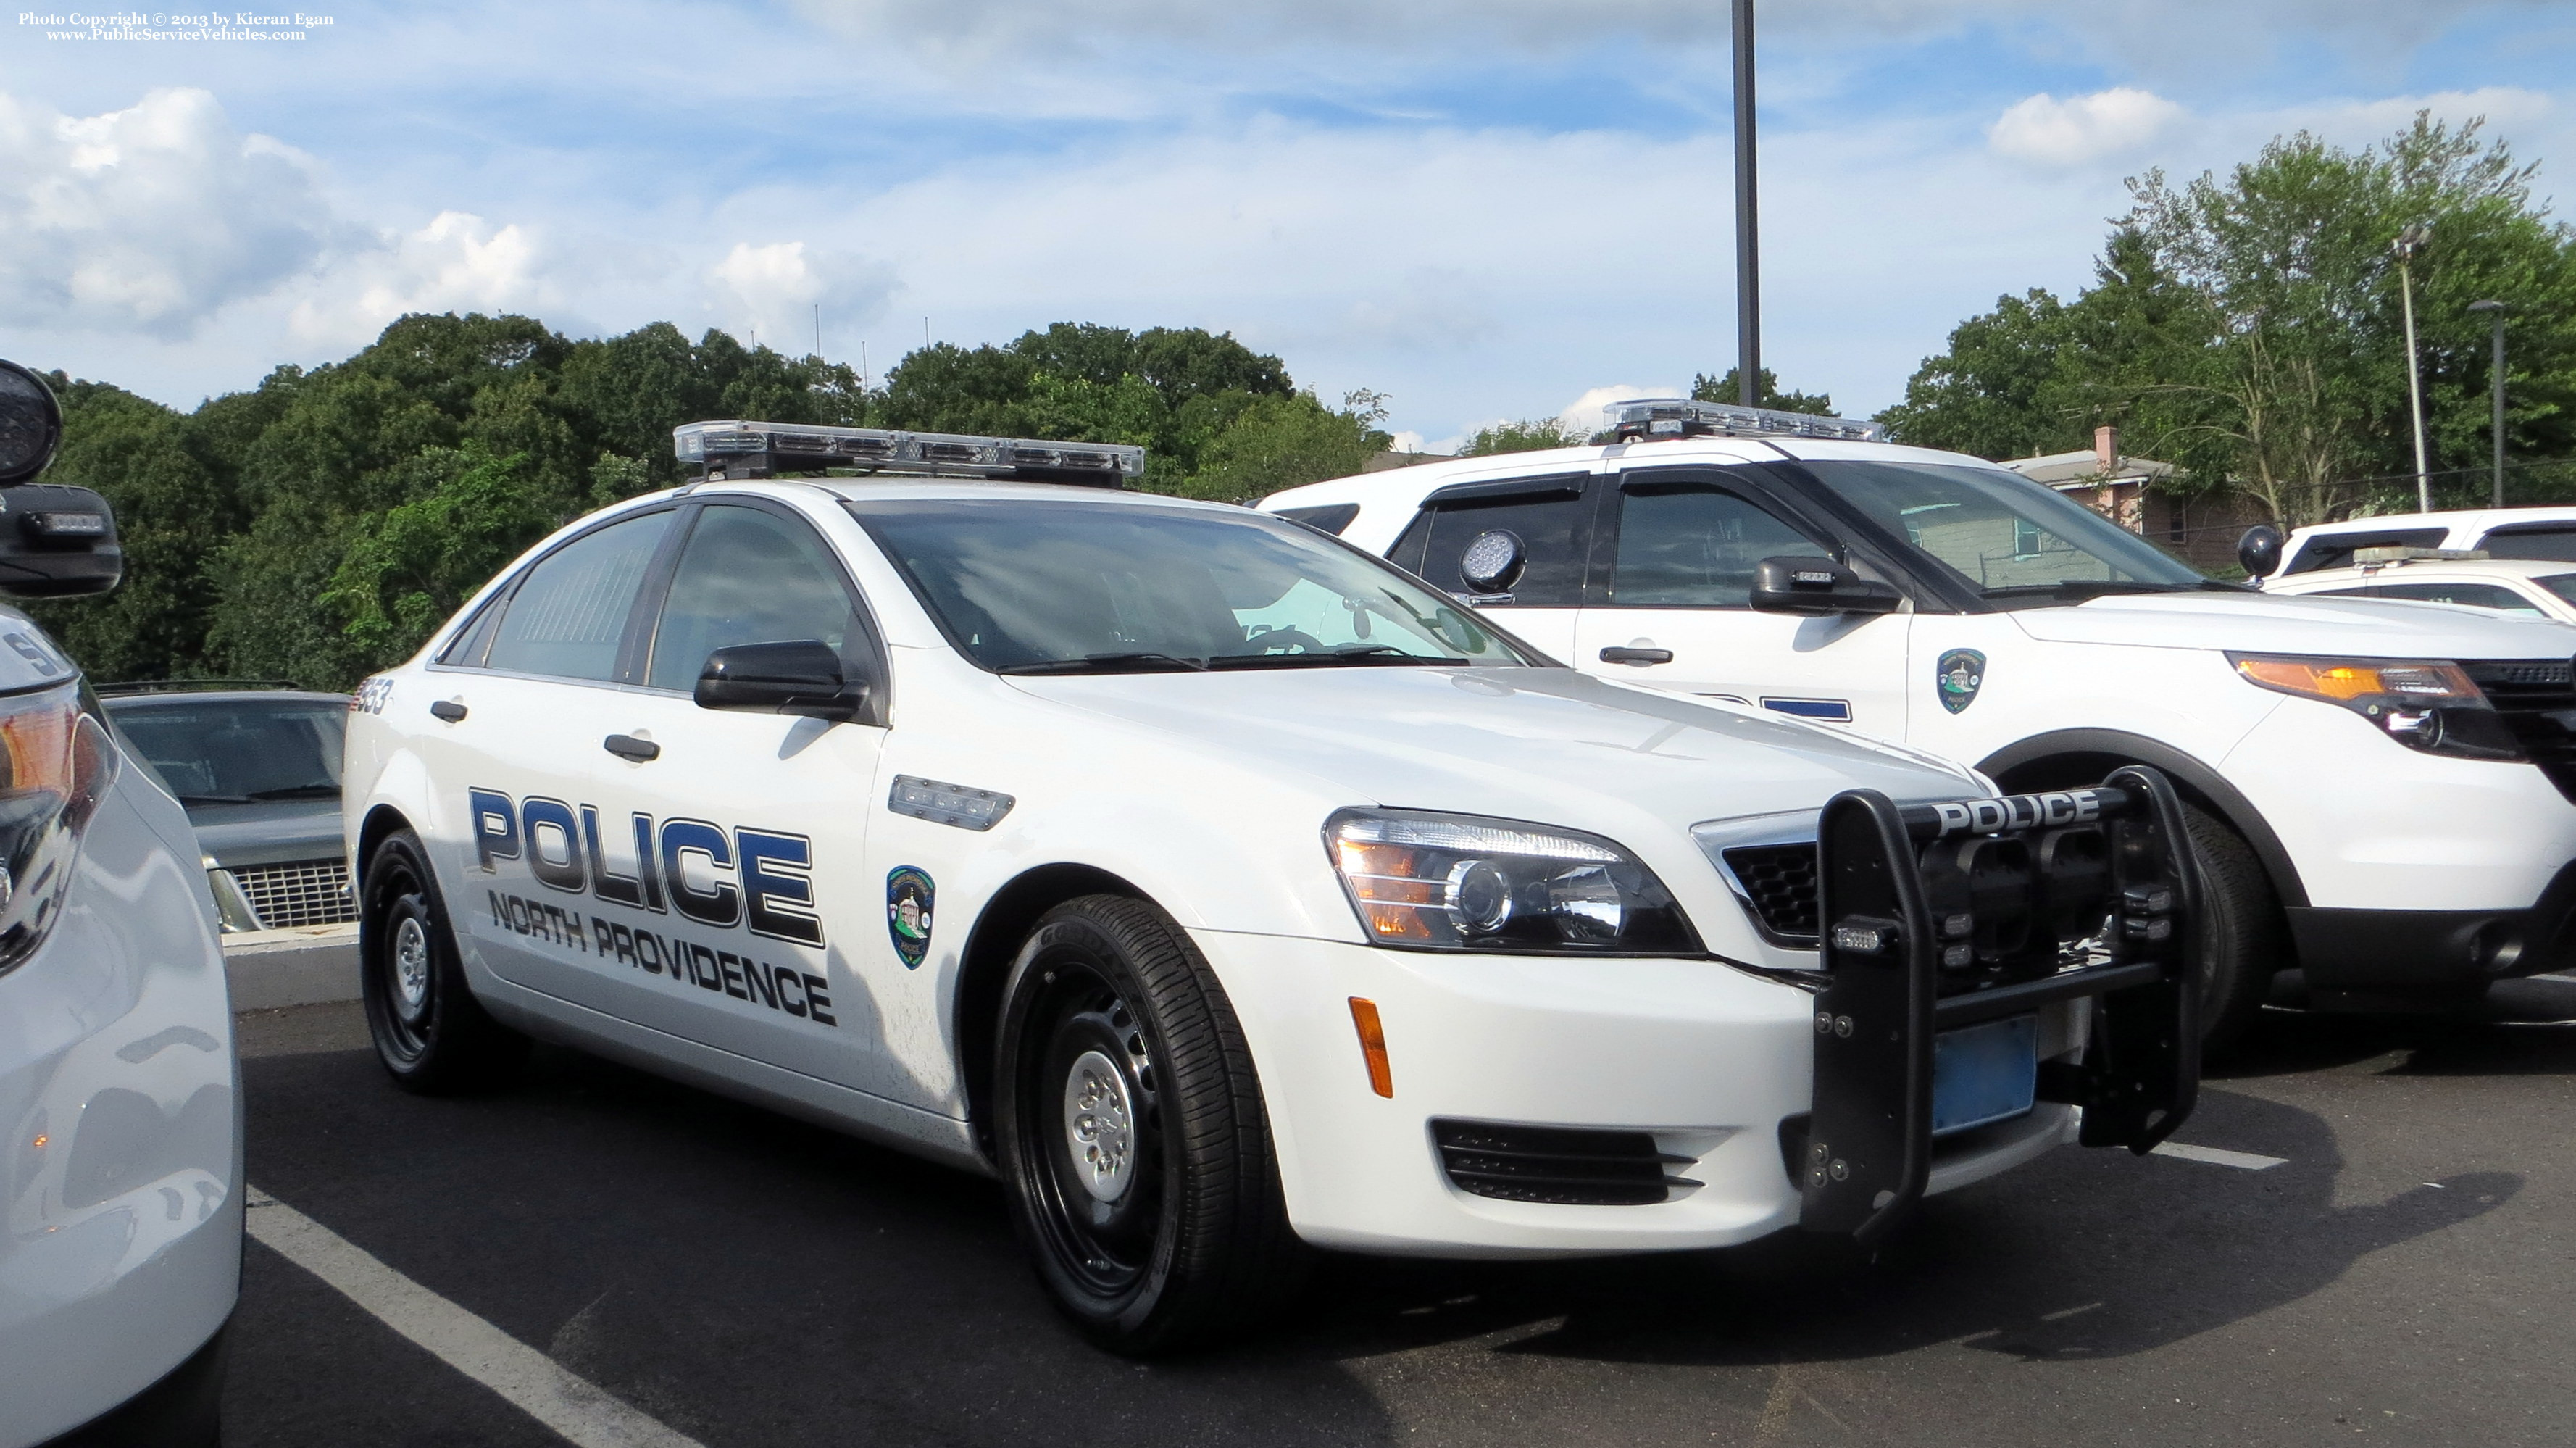 A photo  of North Providence Police
            Cruiser 953, a 2013 Chevrolet Caprice             taken by Kieran Egan